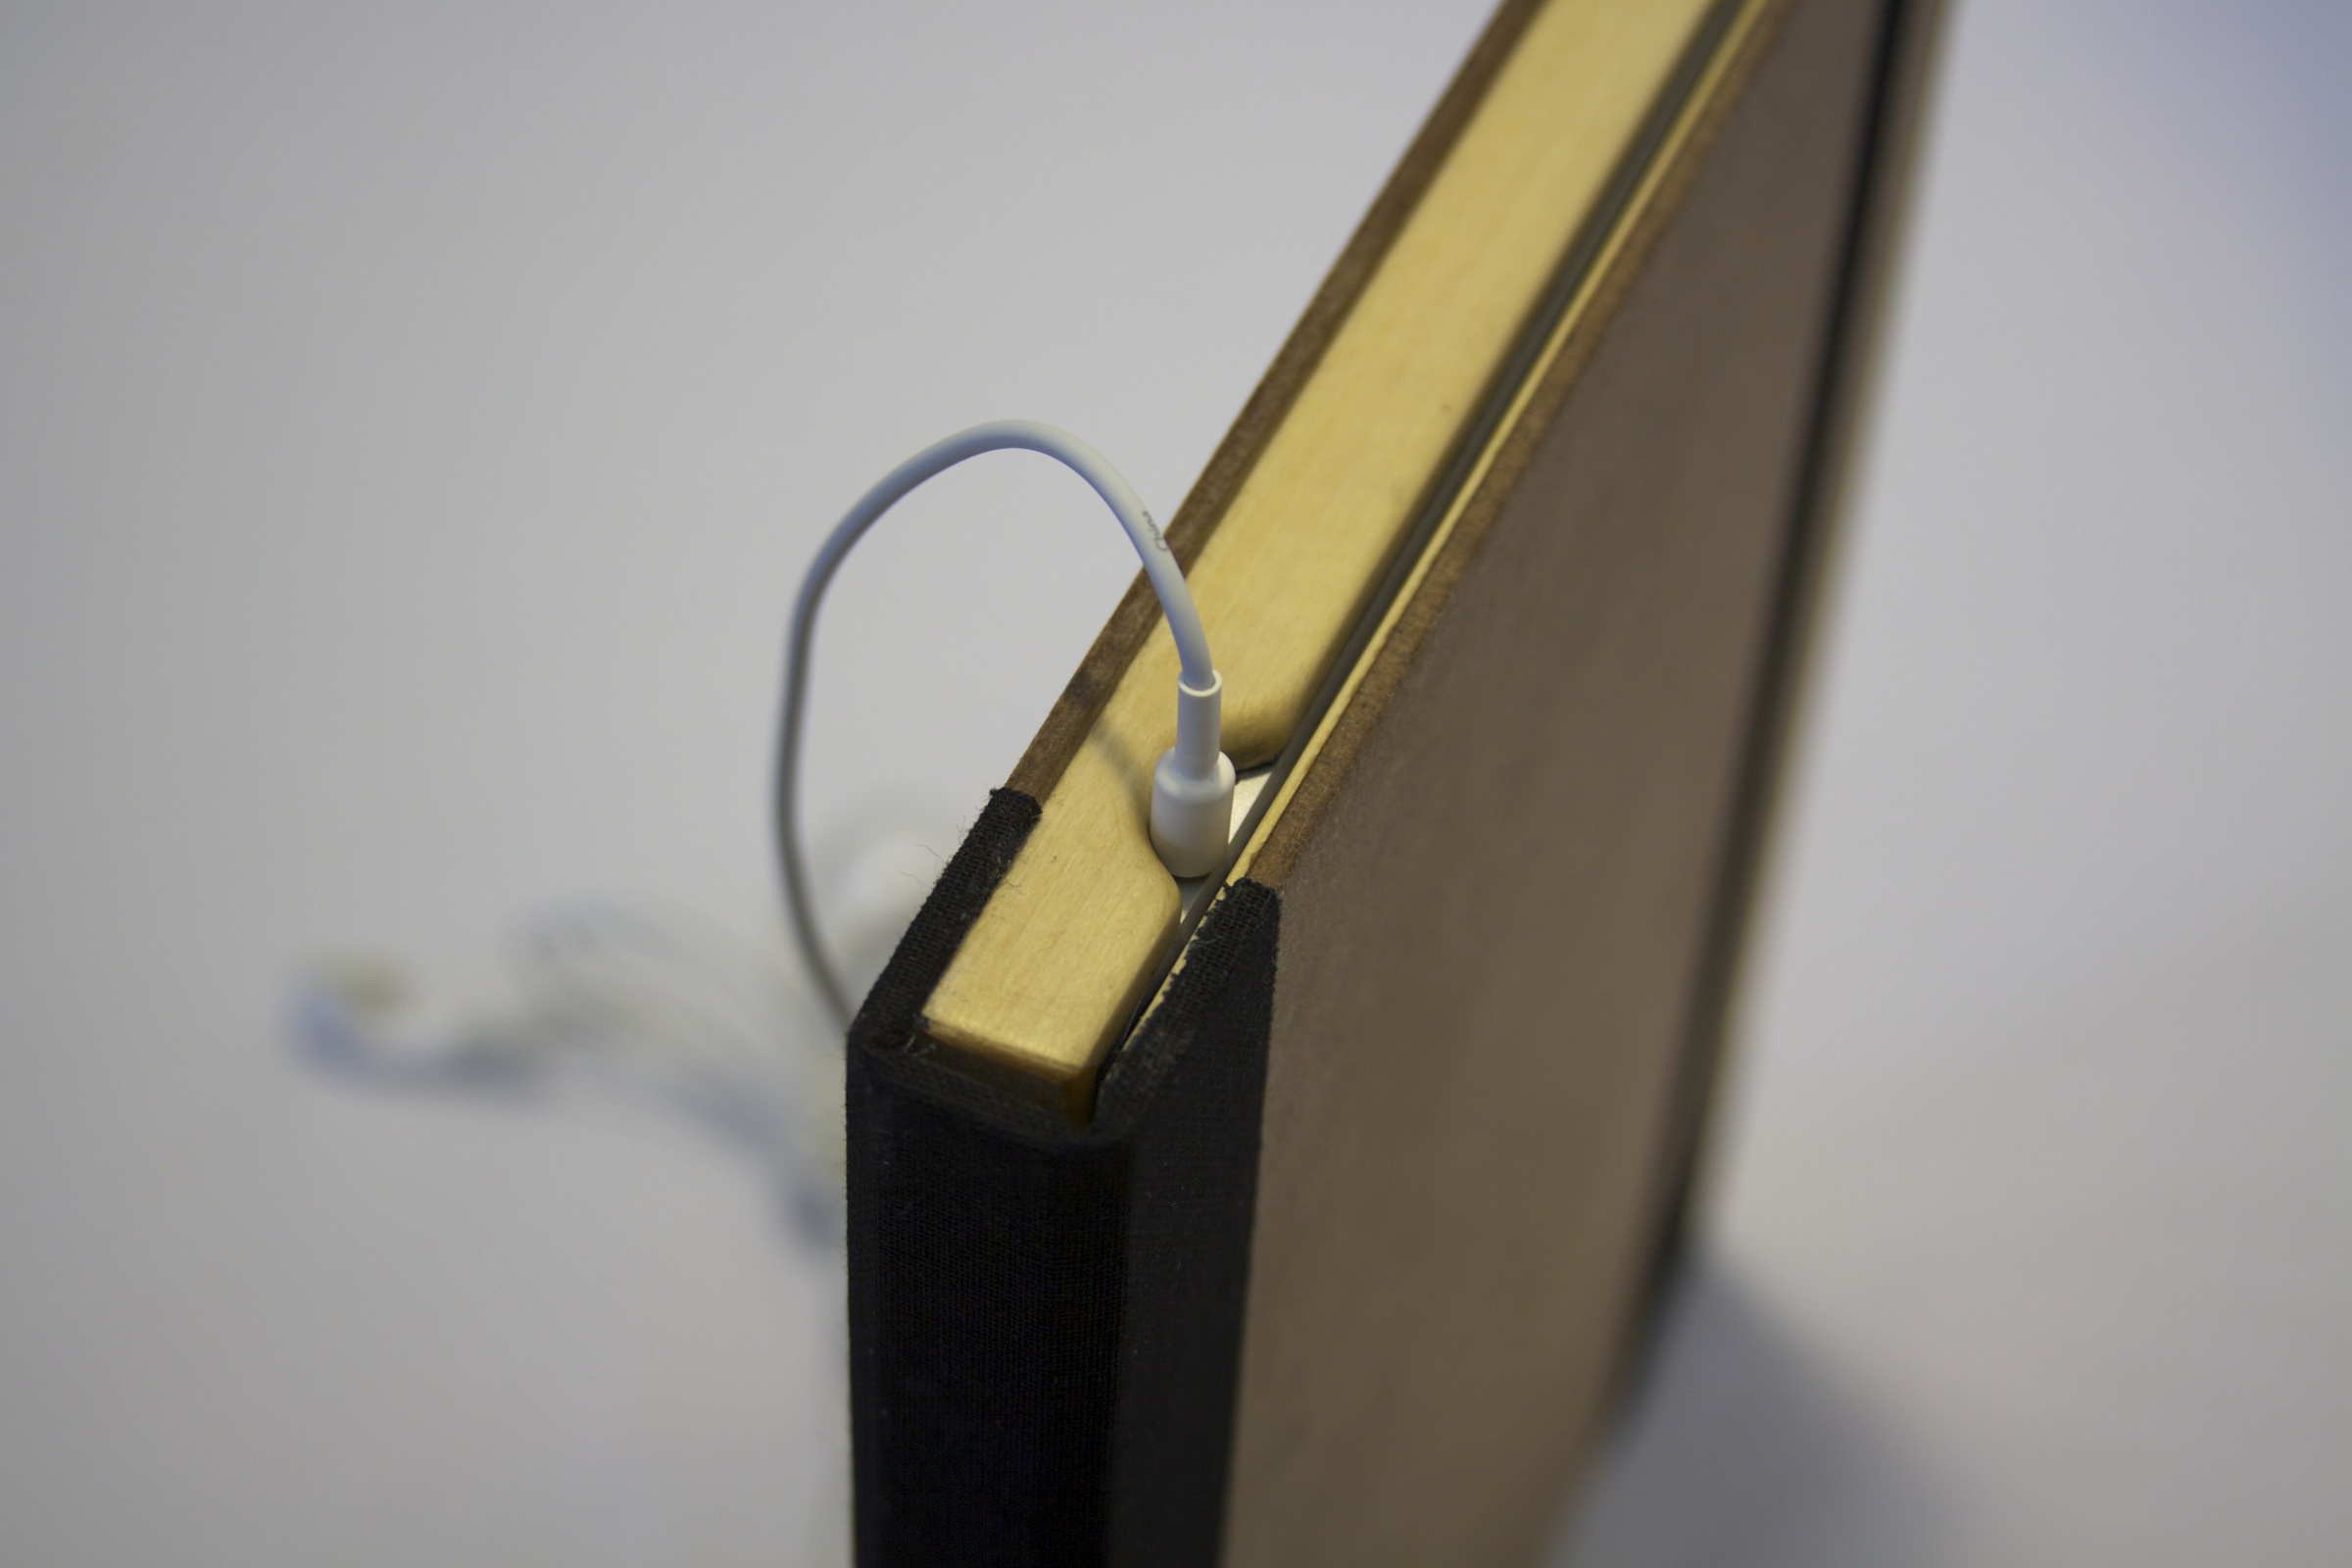   Old Book Case - Headphone Cable in  